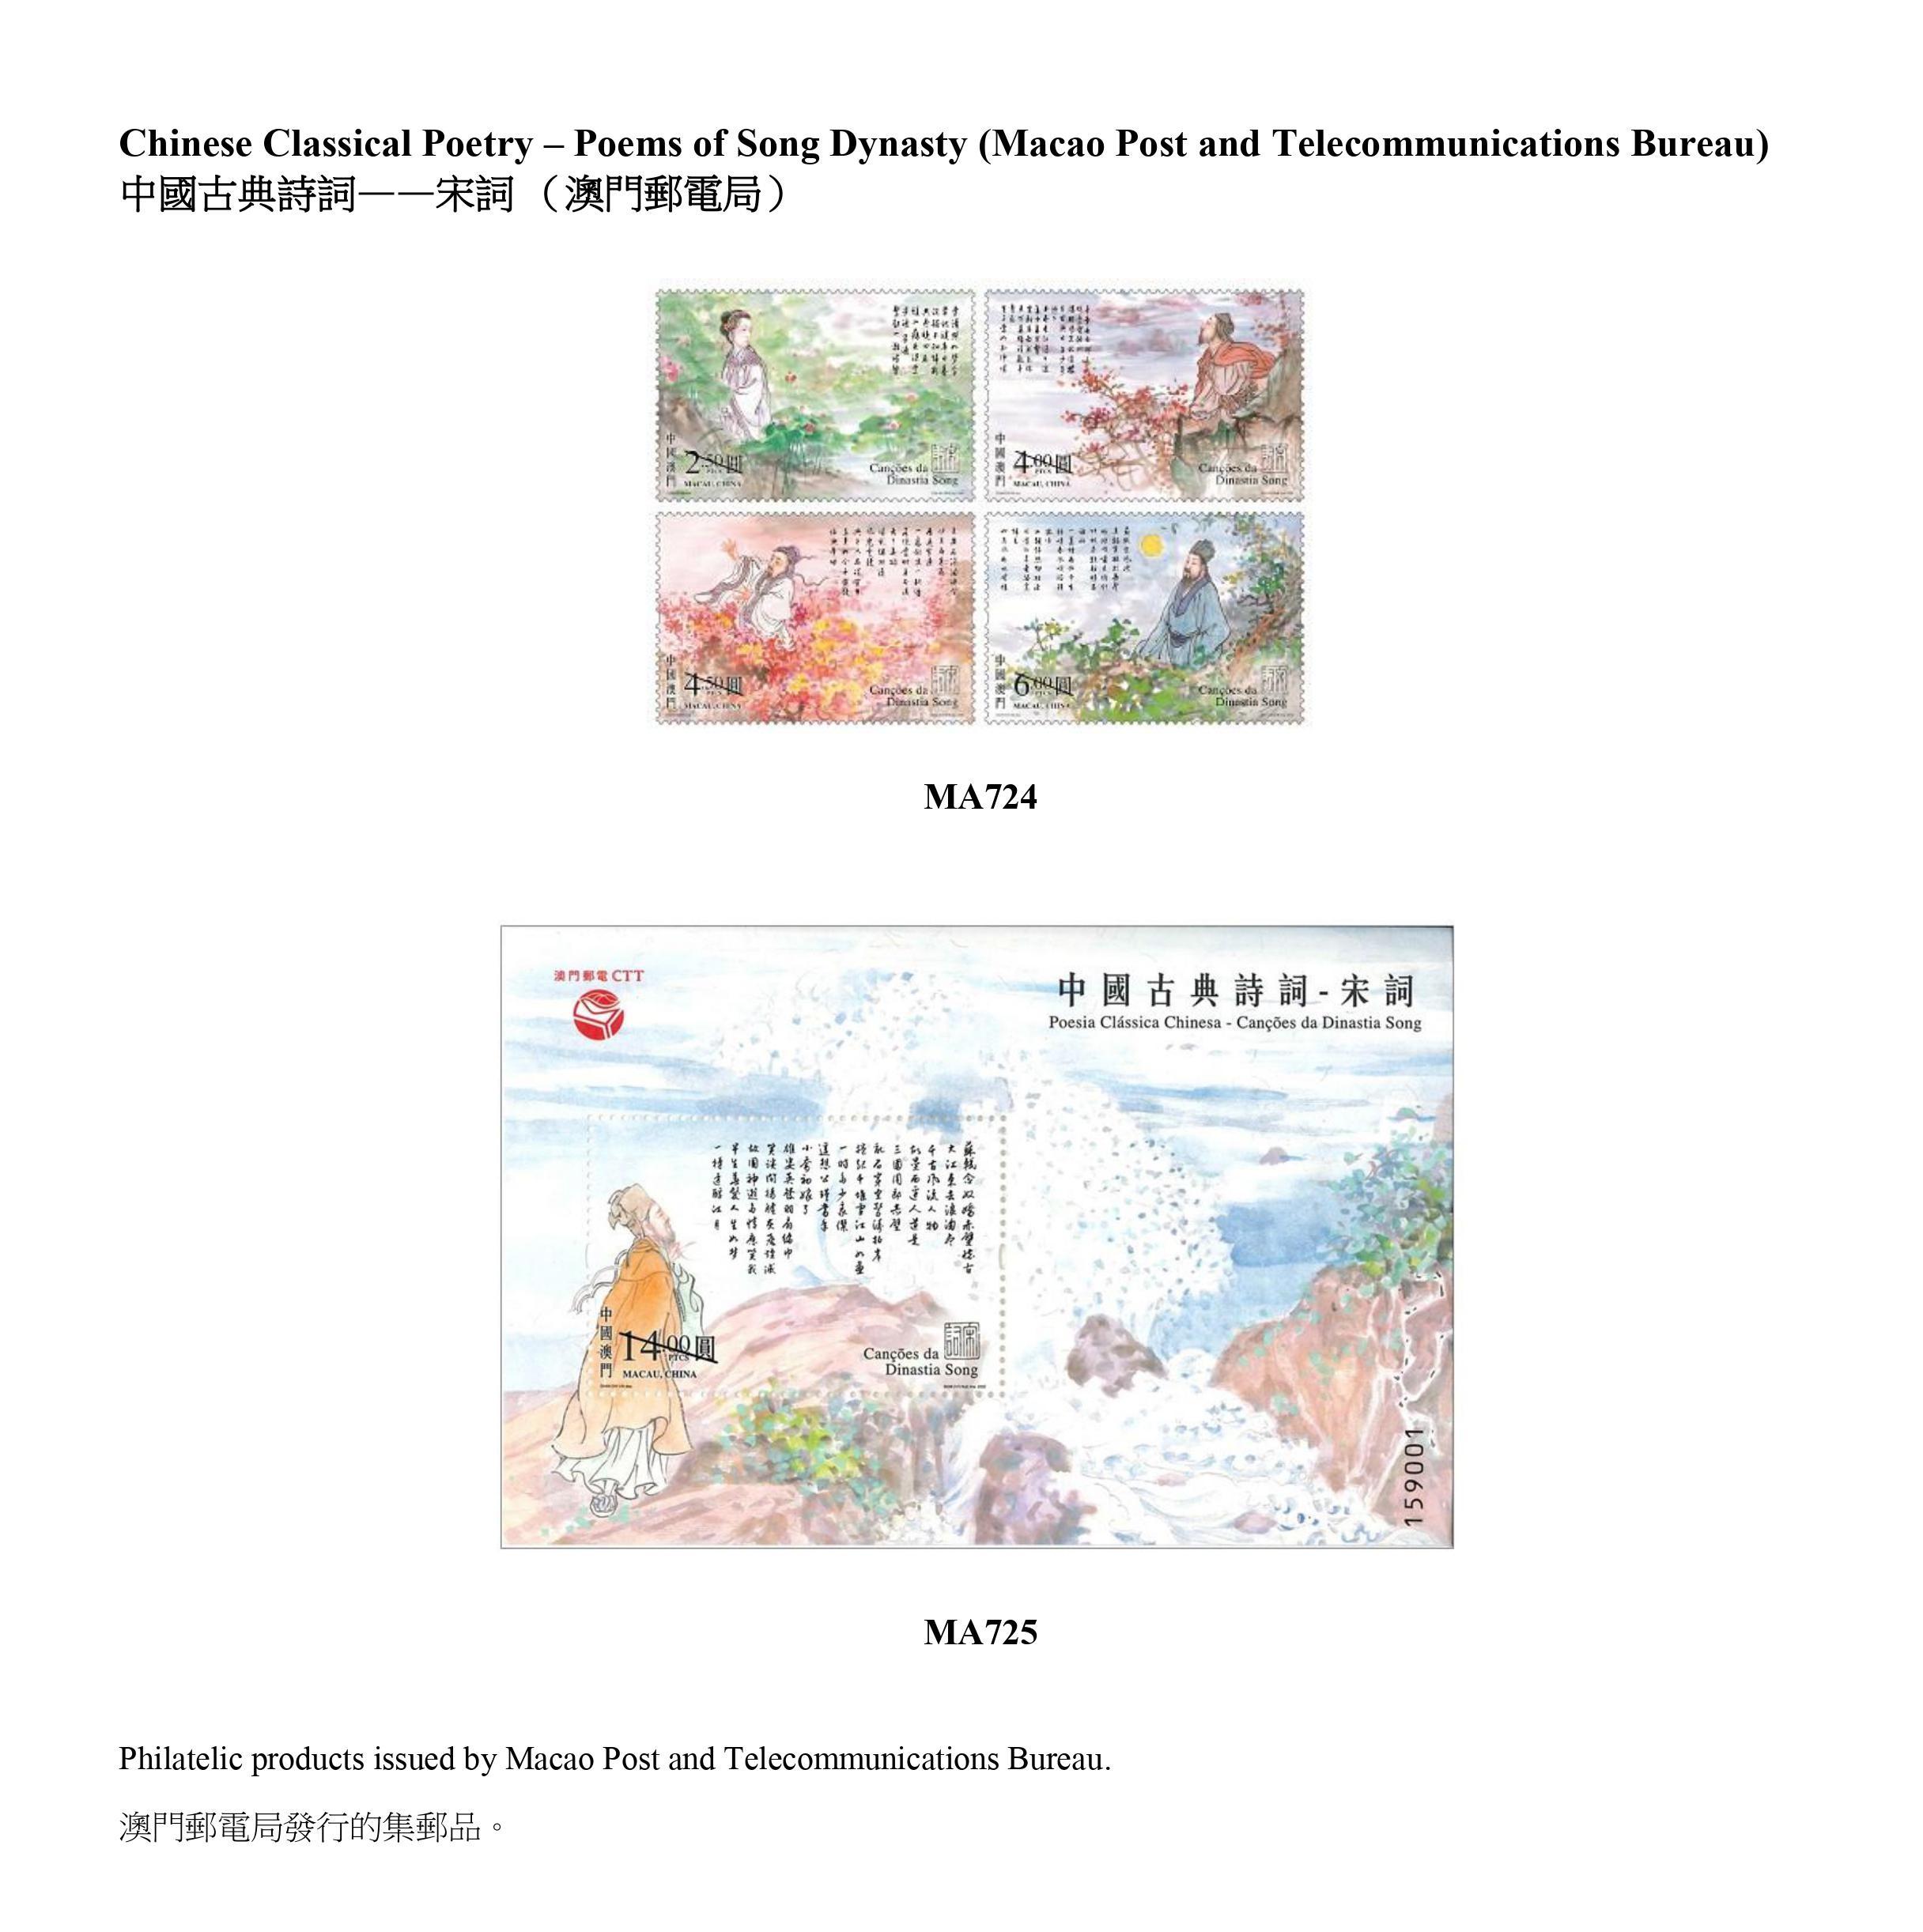 Hongkong Post announced today (January 13) that selected philatelic products issued by China Post, Macao Post and Telecommunications Bureau, Isle of Man Post Office and Royal Mail will be available for online sale from January 17 (Tuesday). Picture shows the philatelic products issued by Macao Post and Telecommunications Bureau.

